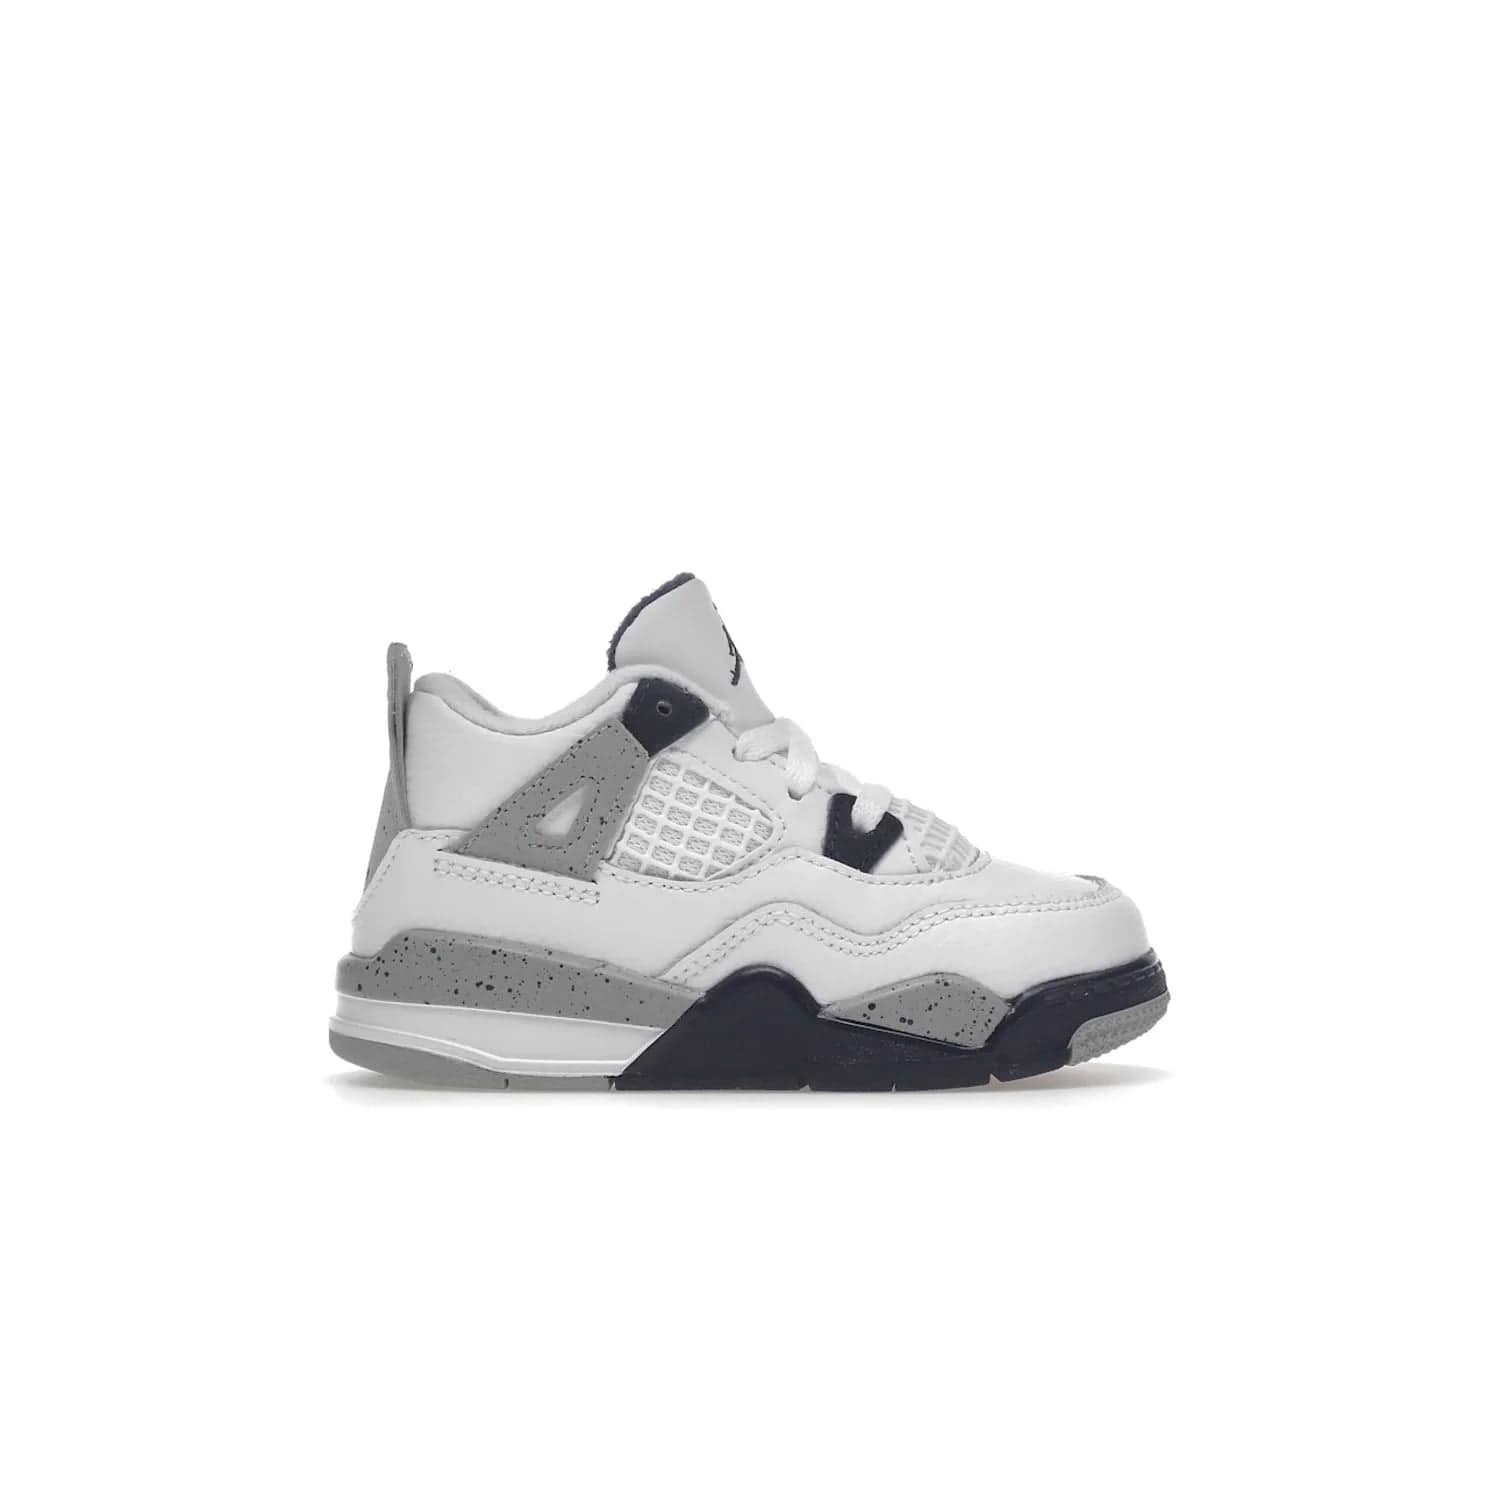 Jordan 4 Retro Midnight Navy (TD) - Image 1 - Only at www.BallersClubKickz.com - Introducing the Jordan 4 Retro Midnight Navy (TD) for kids. White leather upper with navy and grey accents plus fire red detailing. Perfect for everyday wear. Get yours before they sell out.